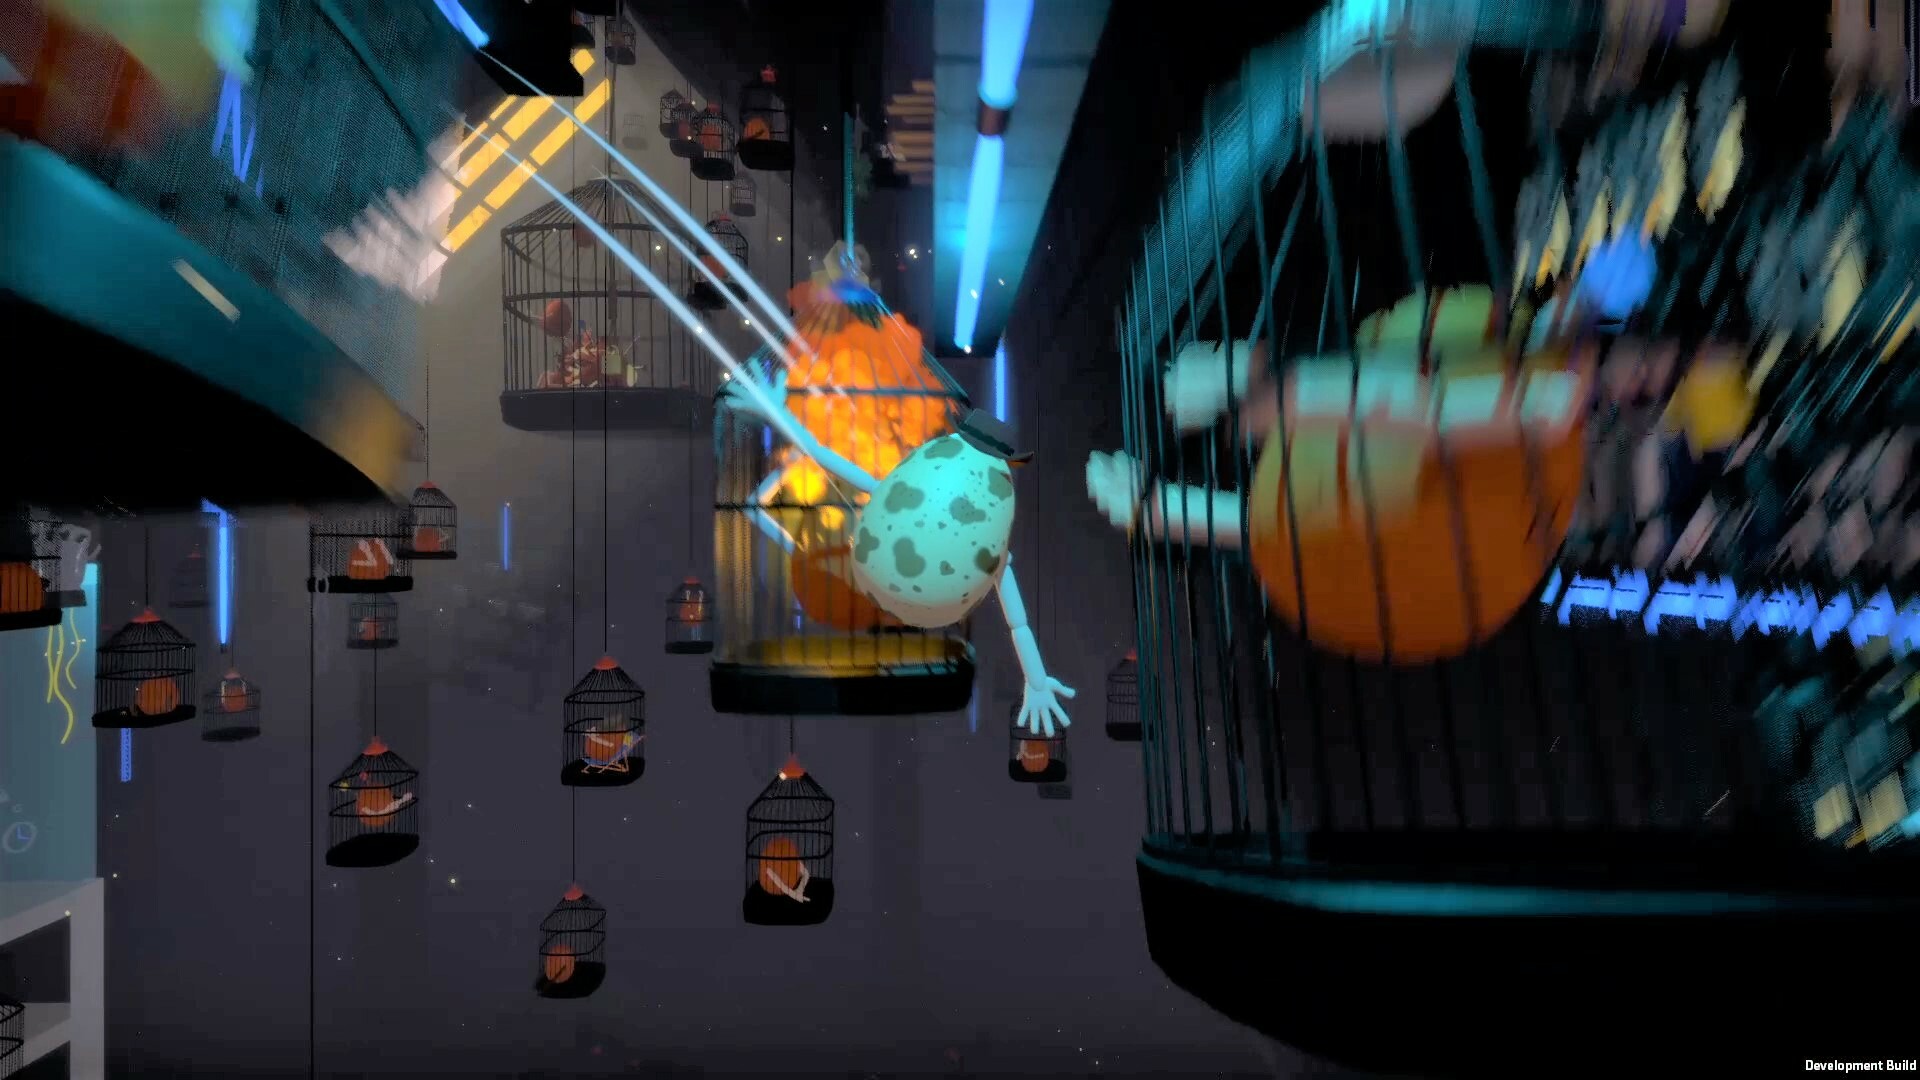 In this screenshot from Yolked, a speckled cartoon egg jumps between cages with other eggs inside in a dark room.